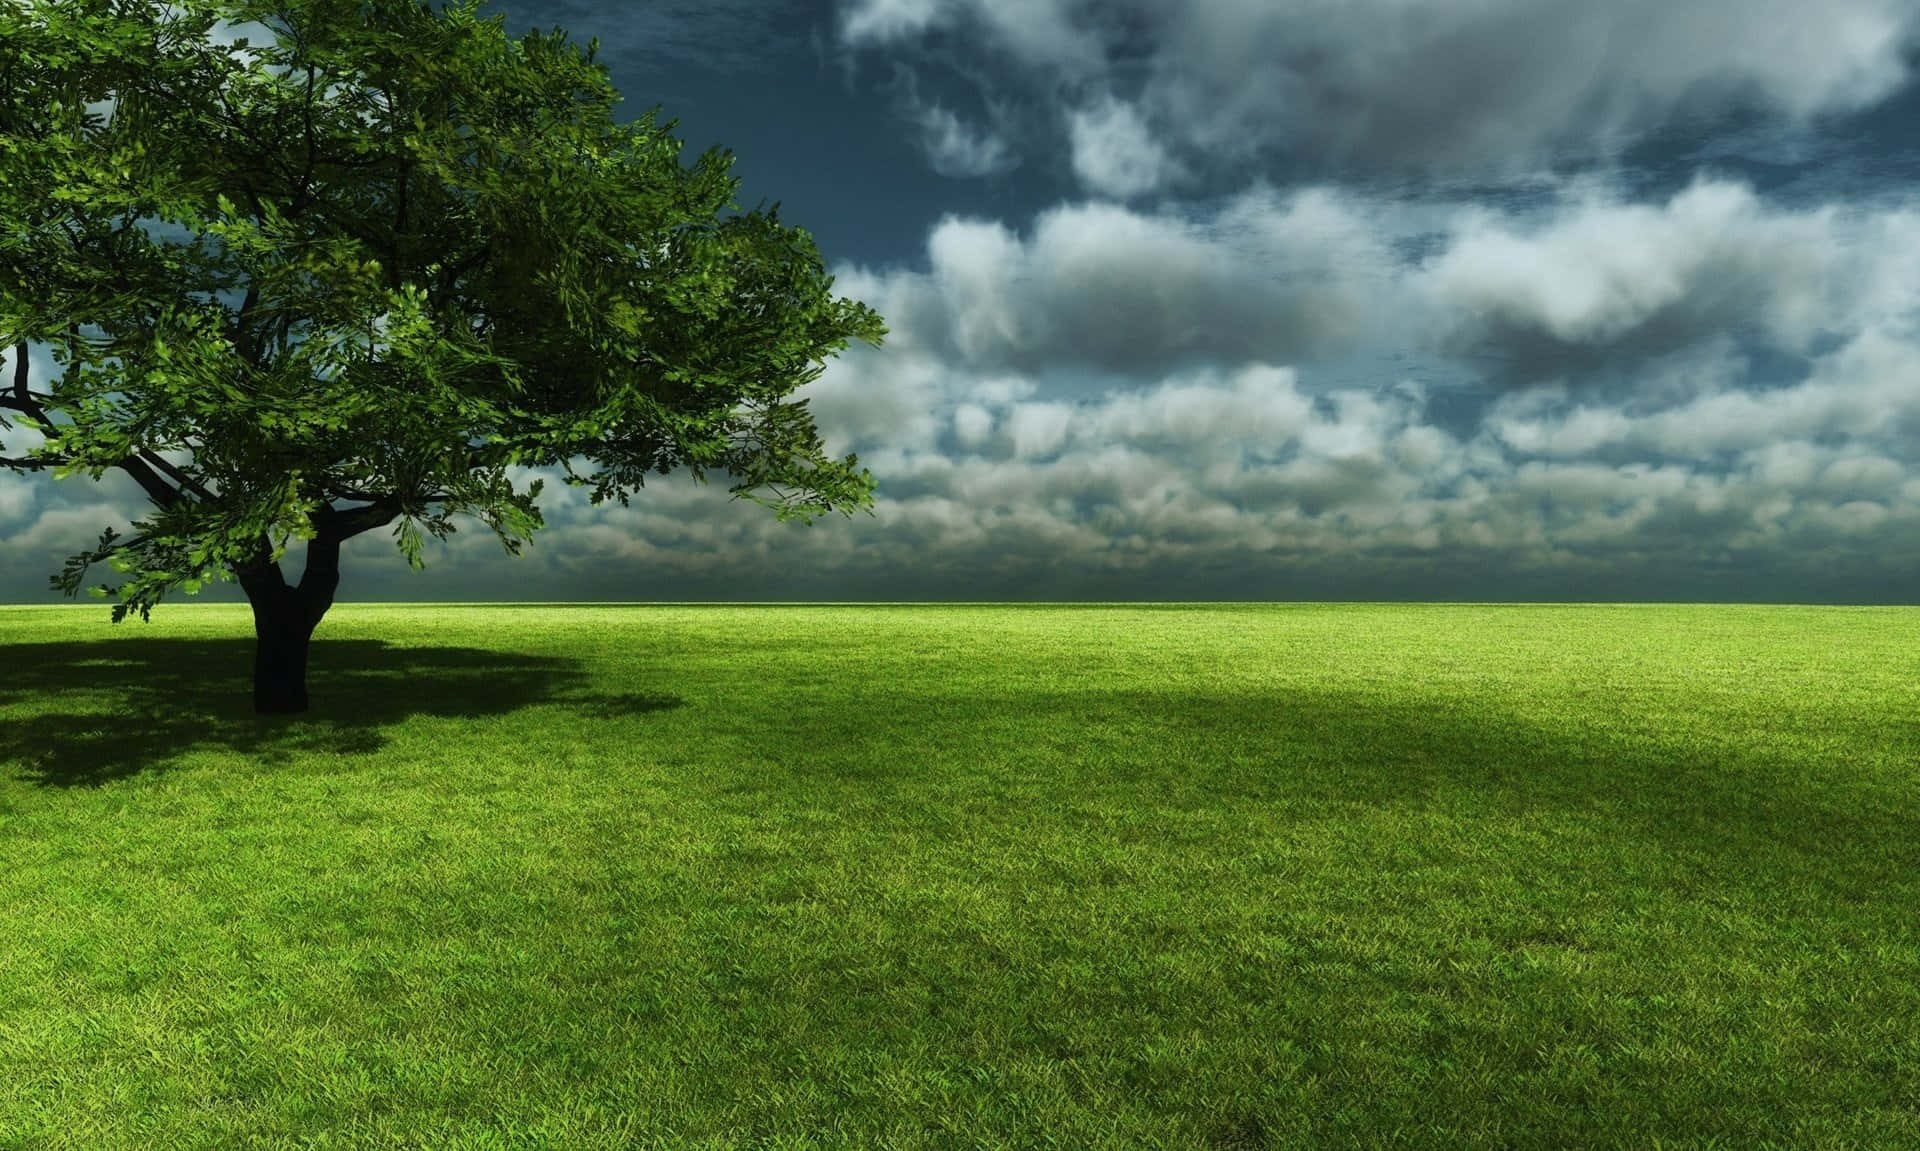 Enjoy this lush and green grassy background!